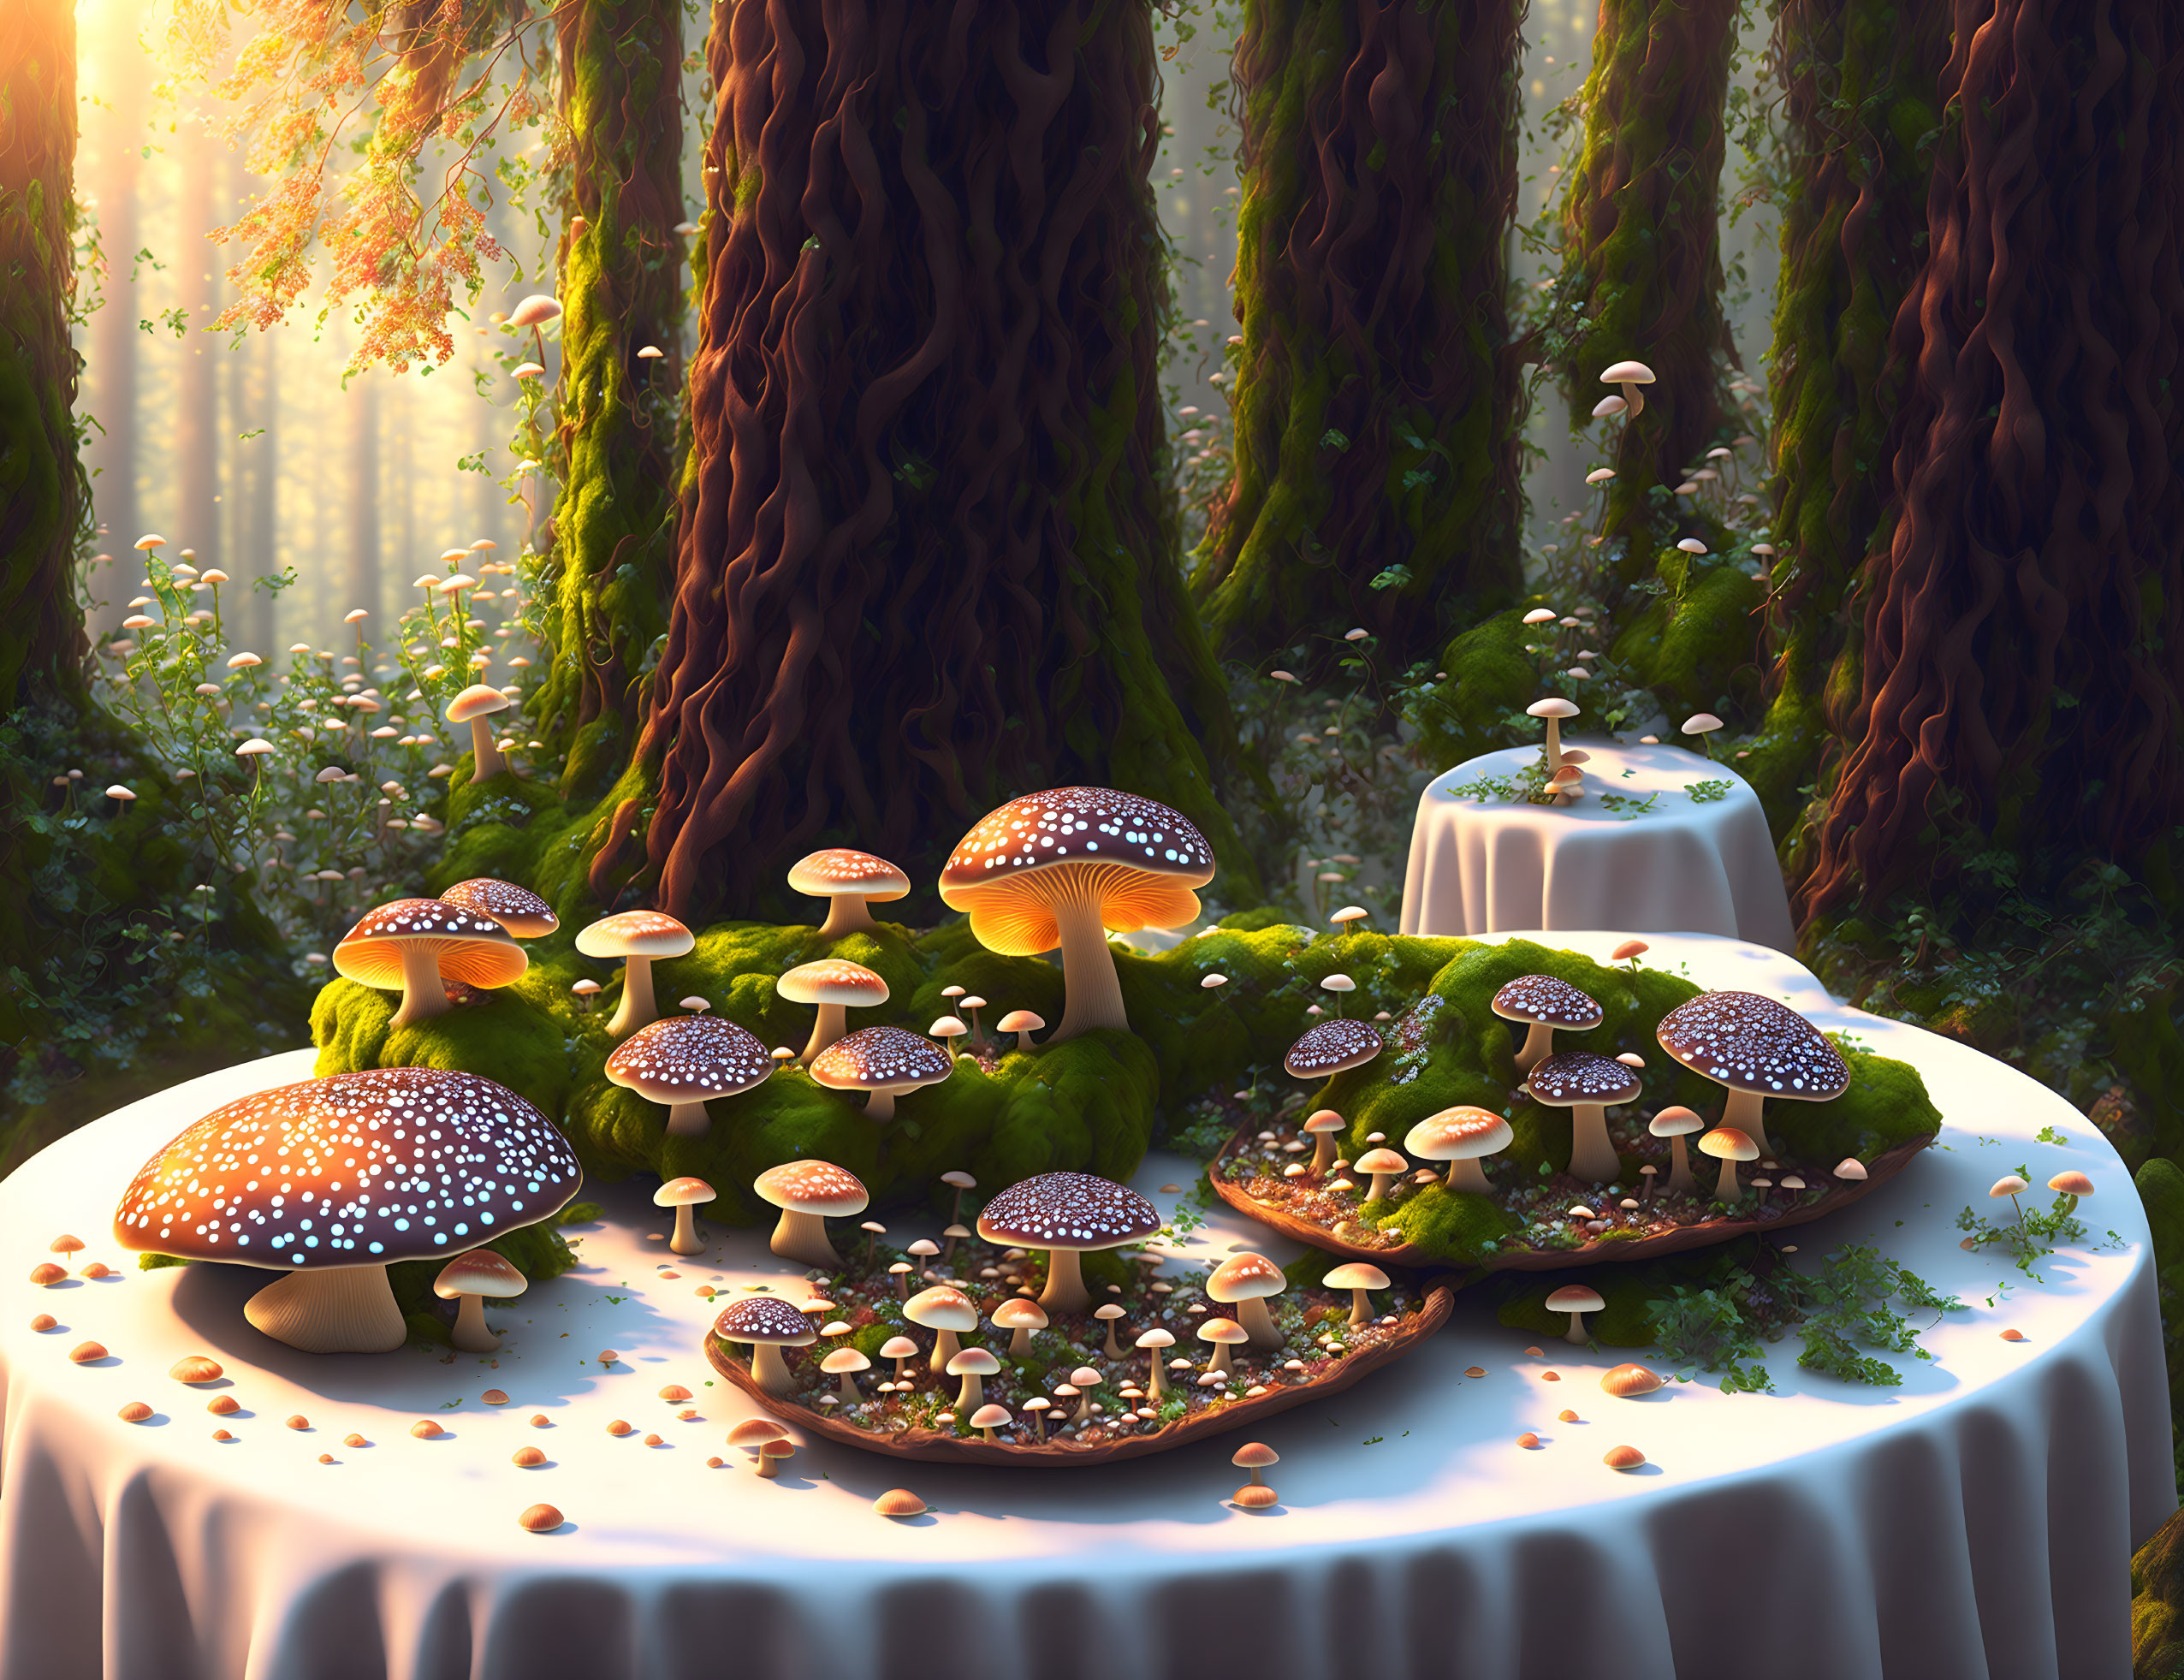 Enchanted Forest Scene with Glowing Mushrooms and Sunlit Trees